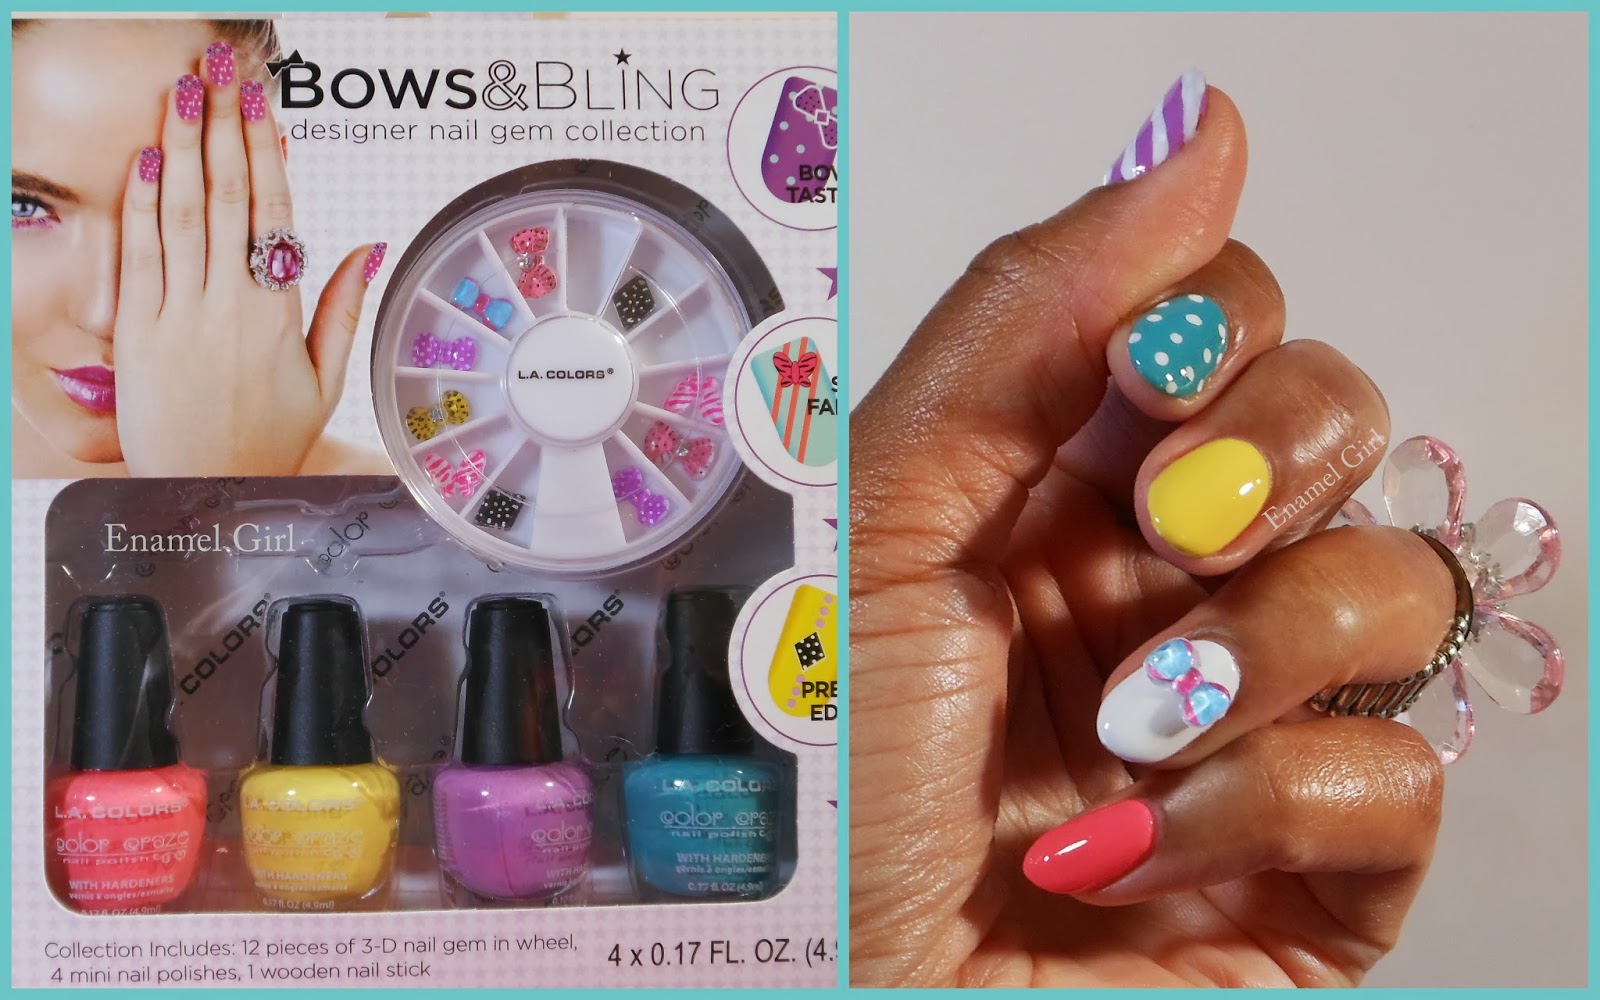 4. Holographic Nail Art Kit Academy: Hands-On Training and Workshops - wide 4